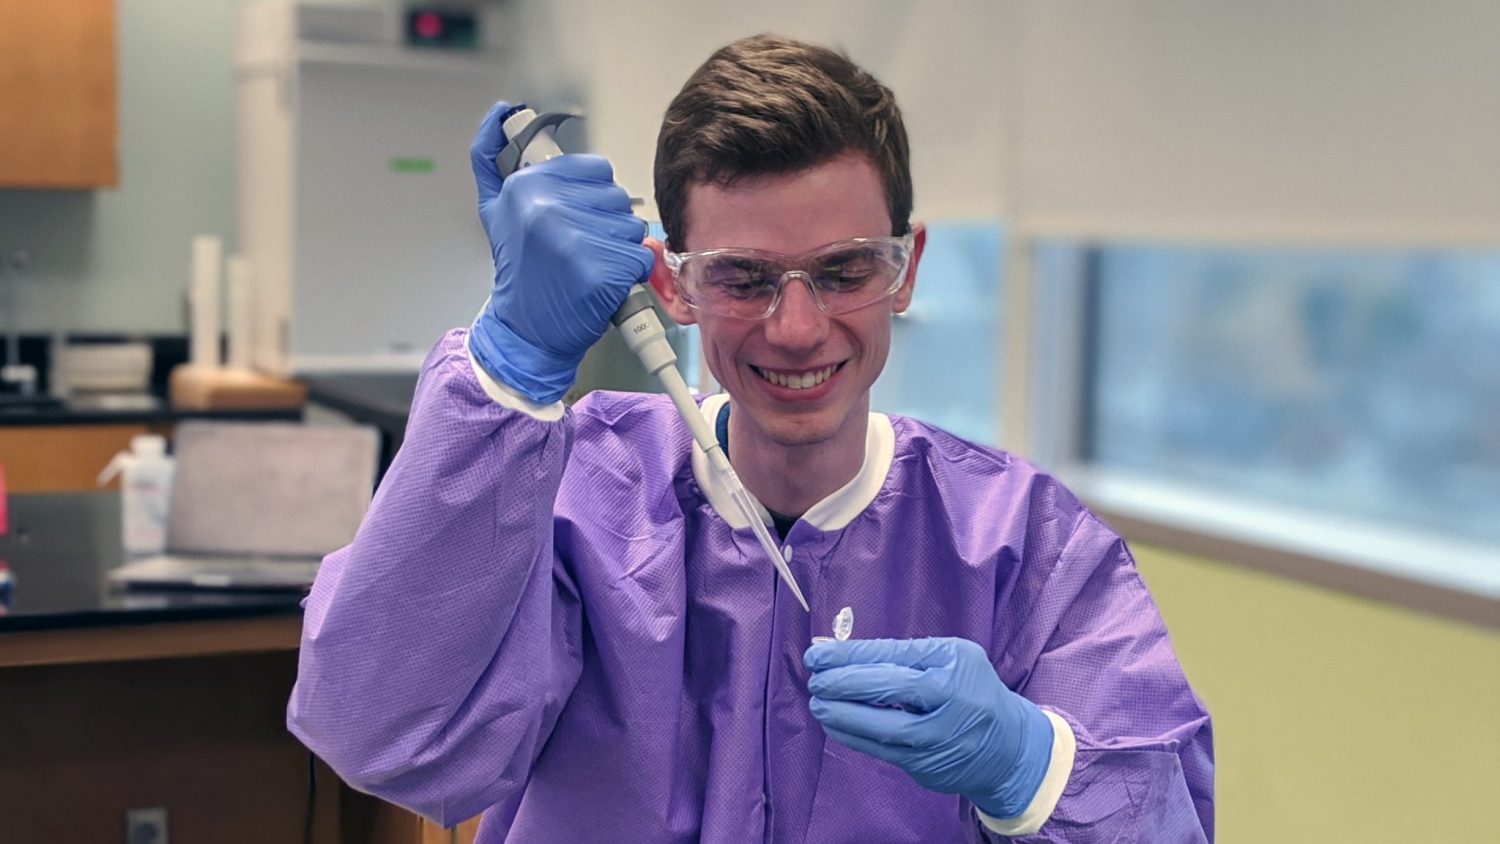 Daniel Heller holds a test tube and pipette in the lab while wearing protective goggles, gloves and a gown.